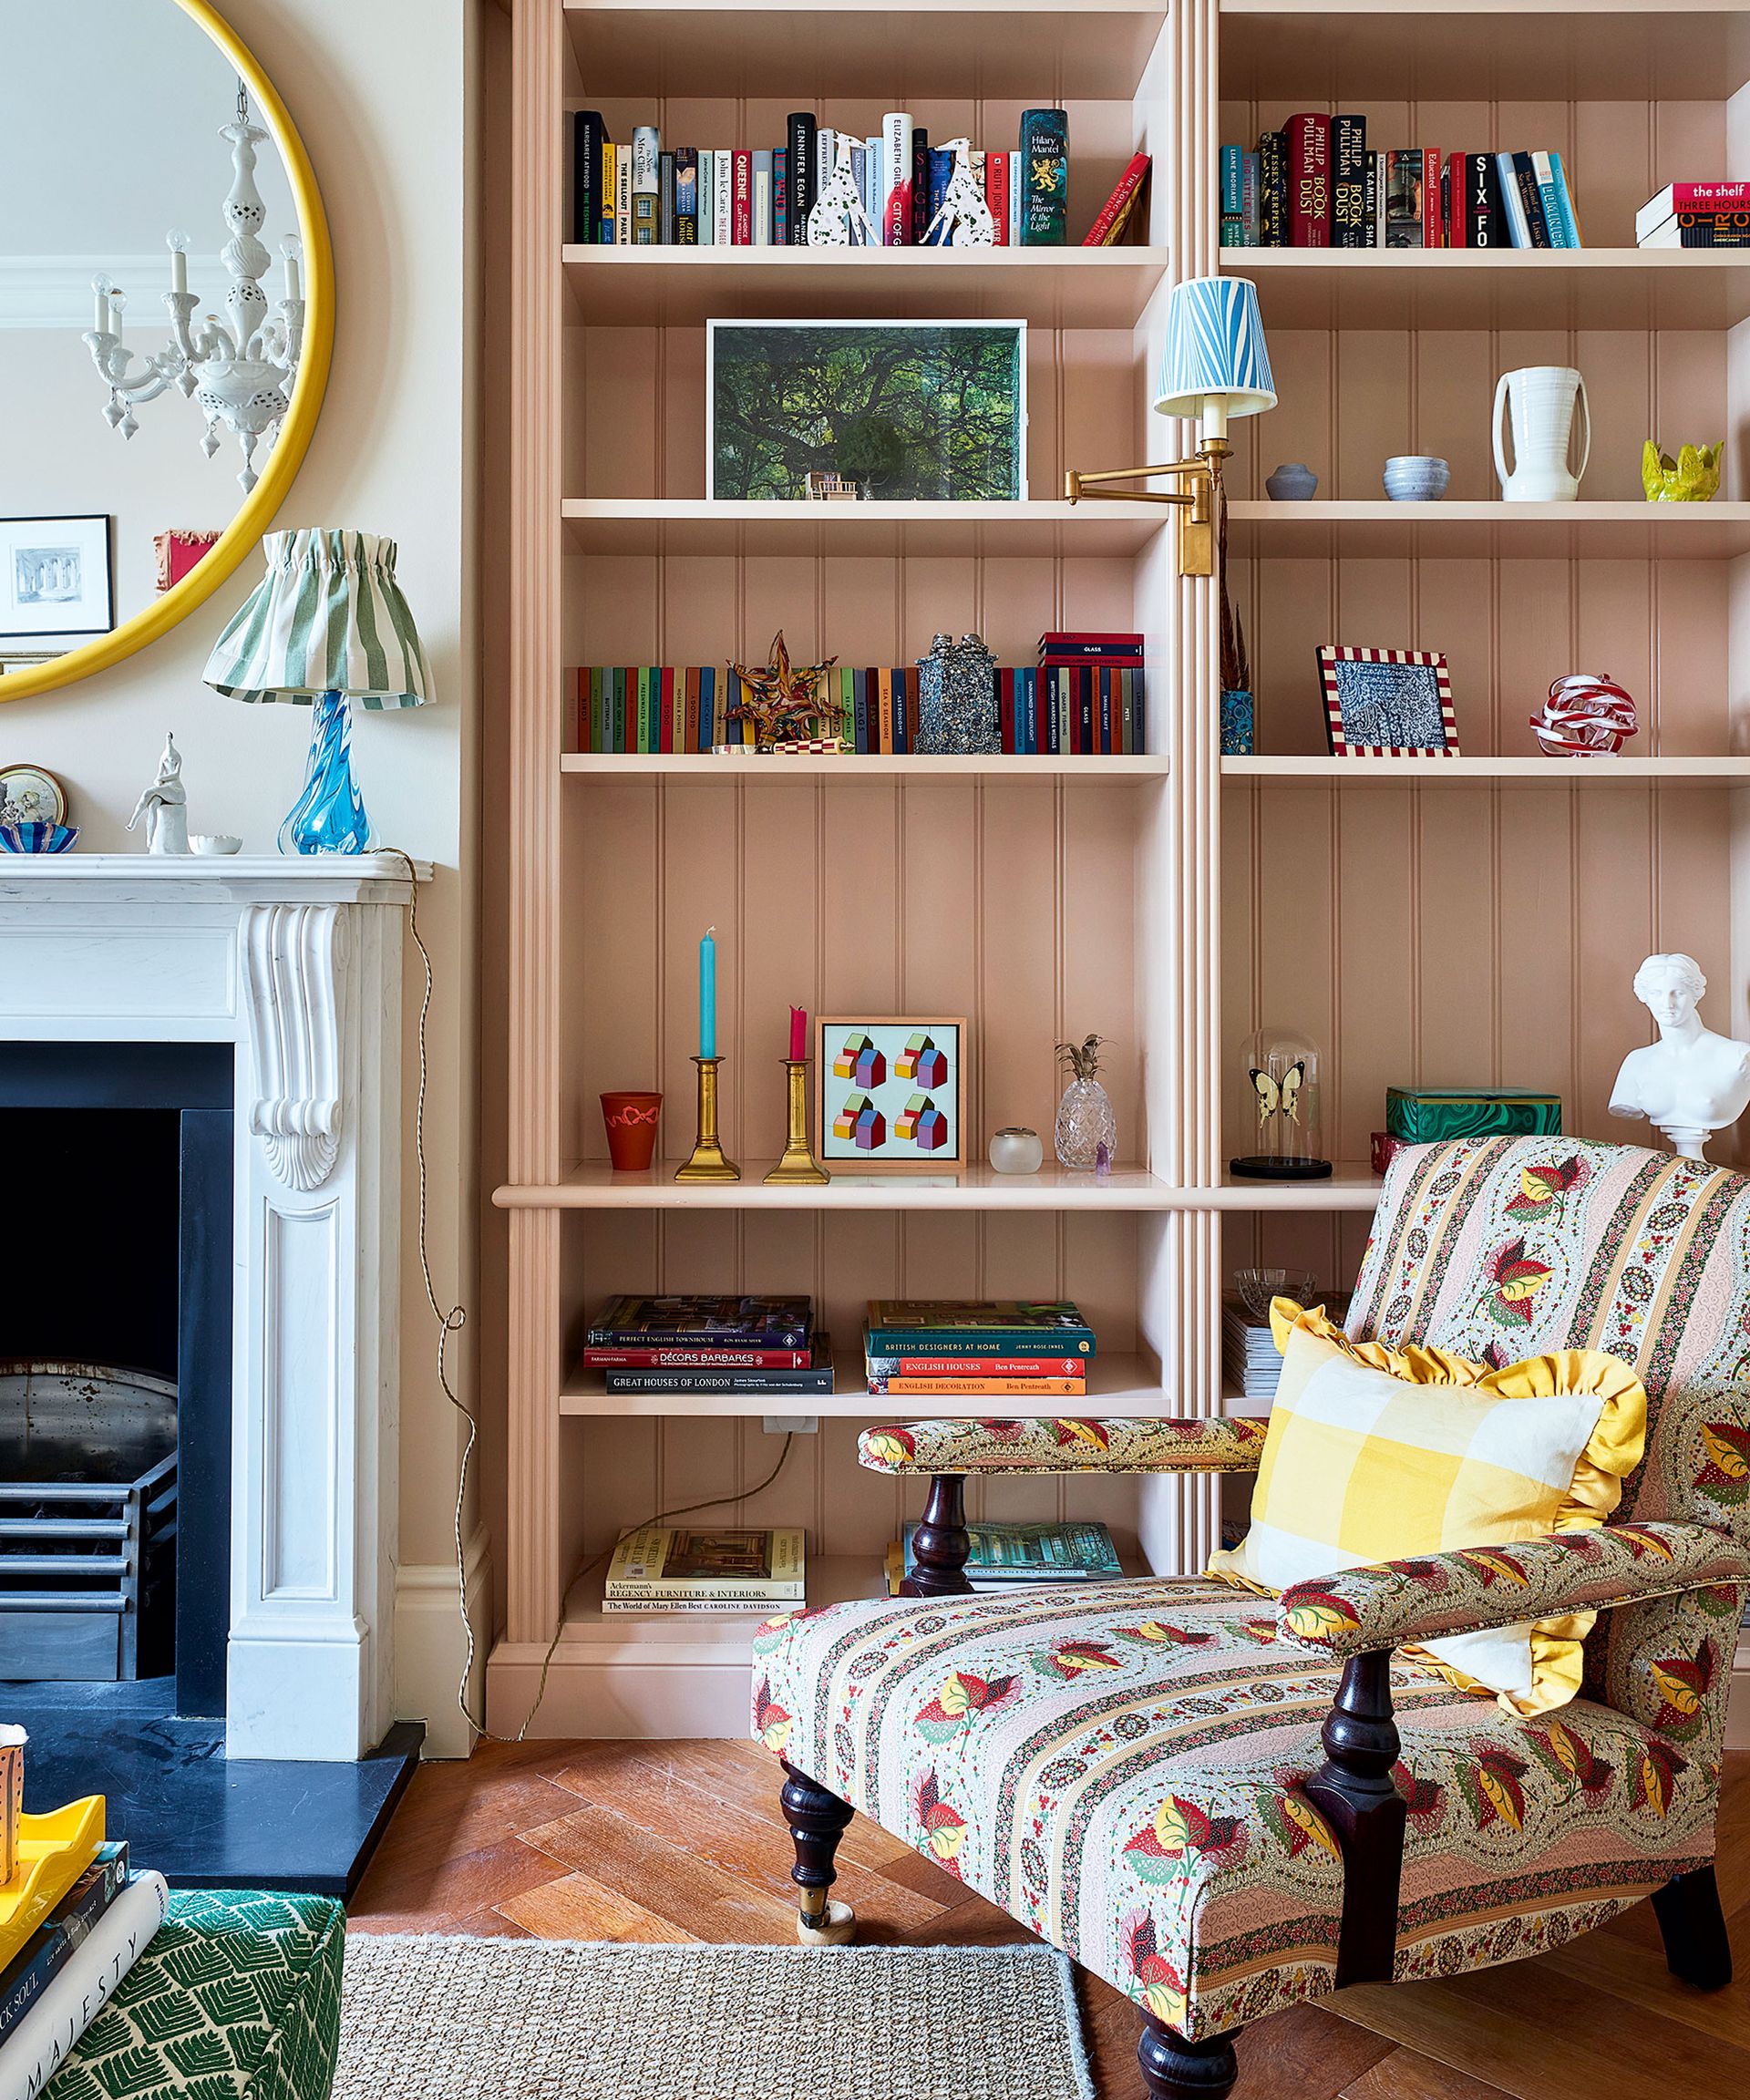 Built-in cabinet ideas for family rooms: 10 designs that shine